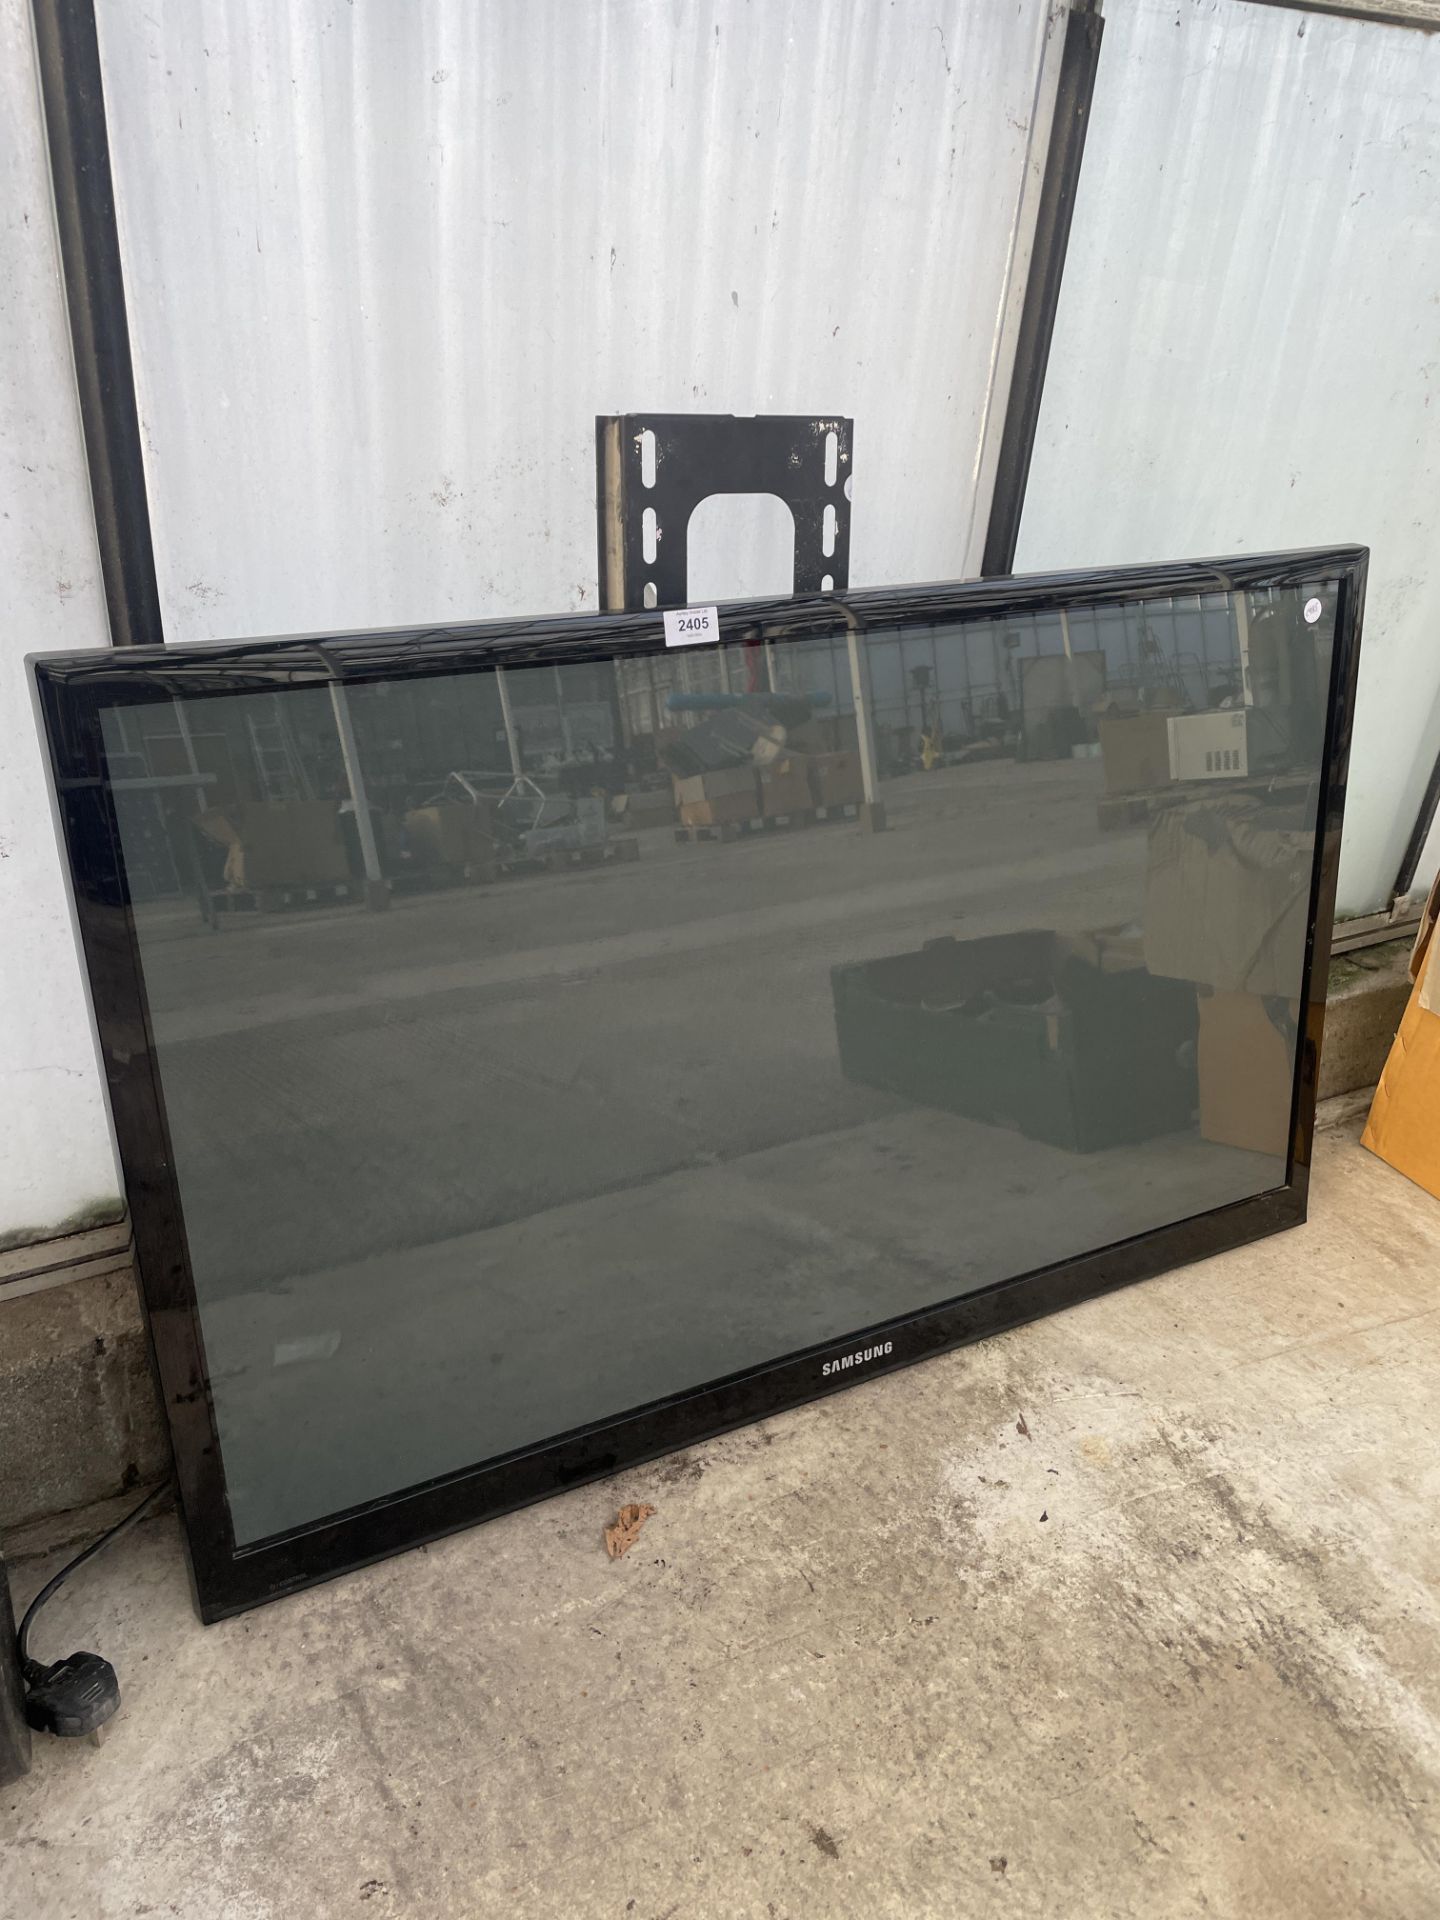 A SAMSUNG 43" TELEVISION WITH WALL MOUNTING BRACKET